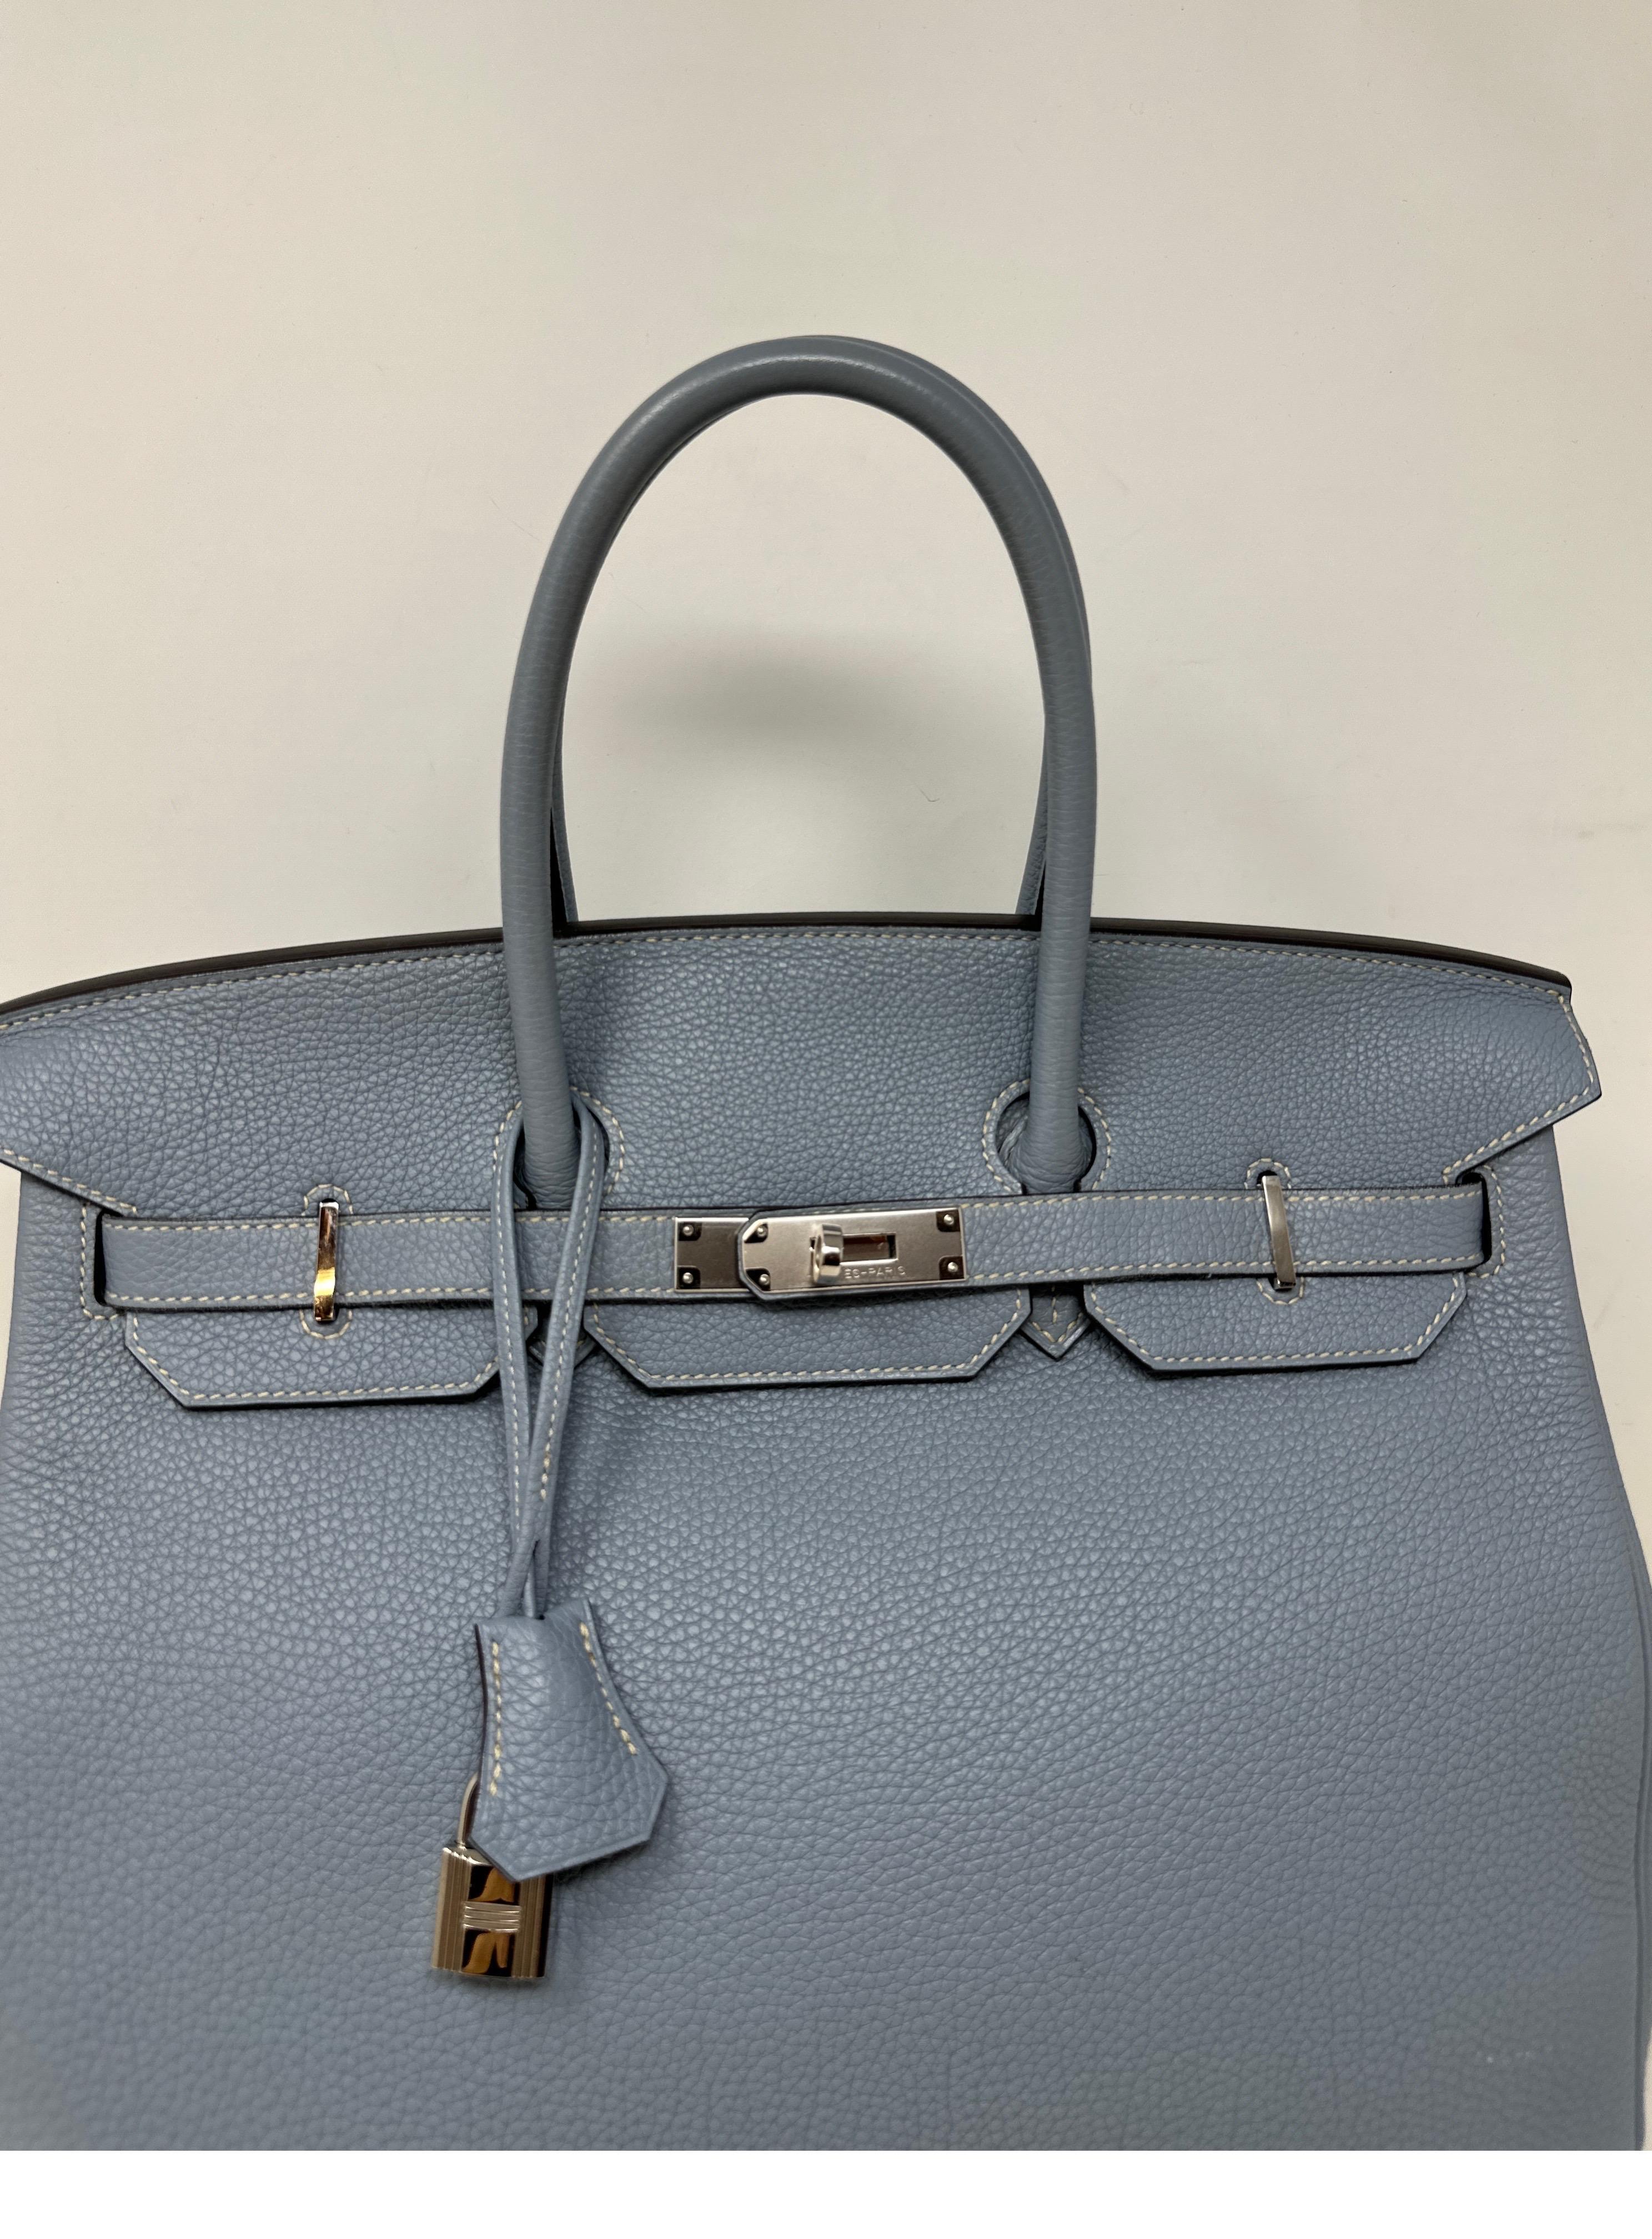 Hermes Blue Lin Birkin 35 Bag. Light blue grey color. Excellent condition. Stunning bag. Palladium silver hardware. Togo leather. Interior clean. Looks like new. Includes clochette, lock, keys, and dust bag. Guaranteed authentic. 